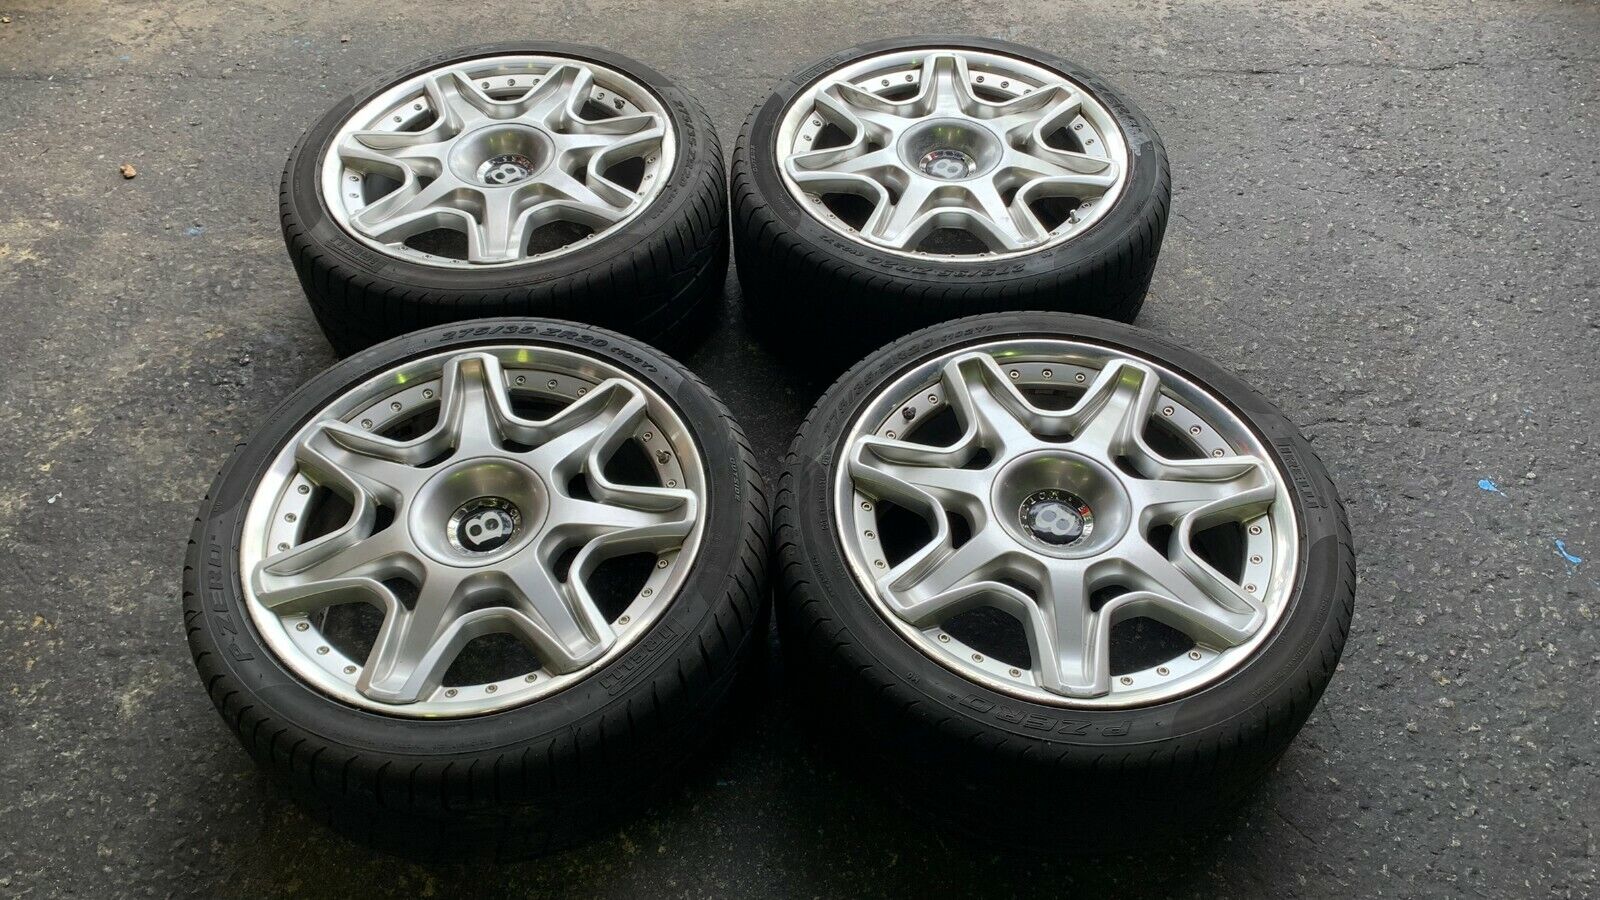 BENTLEY CONTINENTAL FLYING SPUR 2012 20 INCH ALLOY WHEELS RIMS WITH TYRES #1728